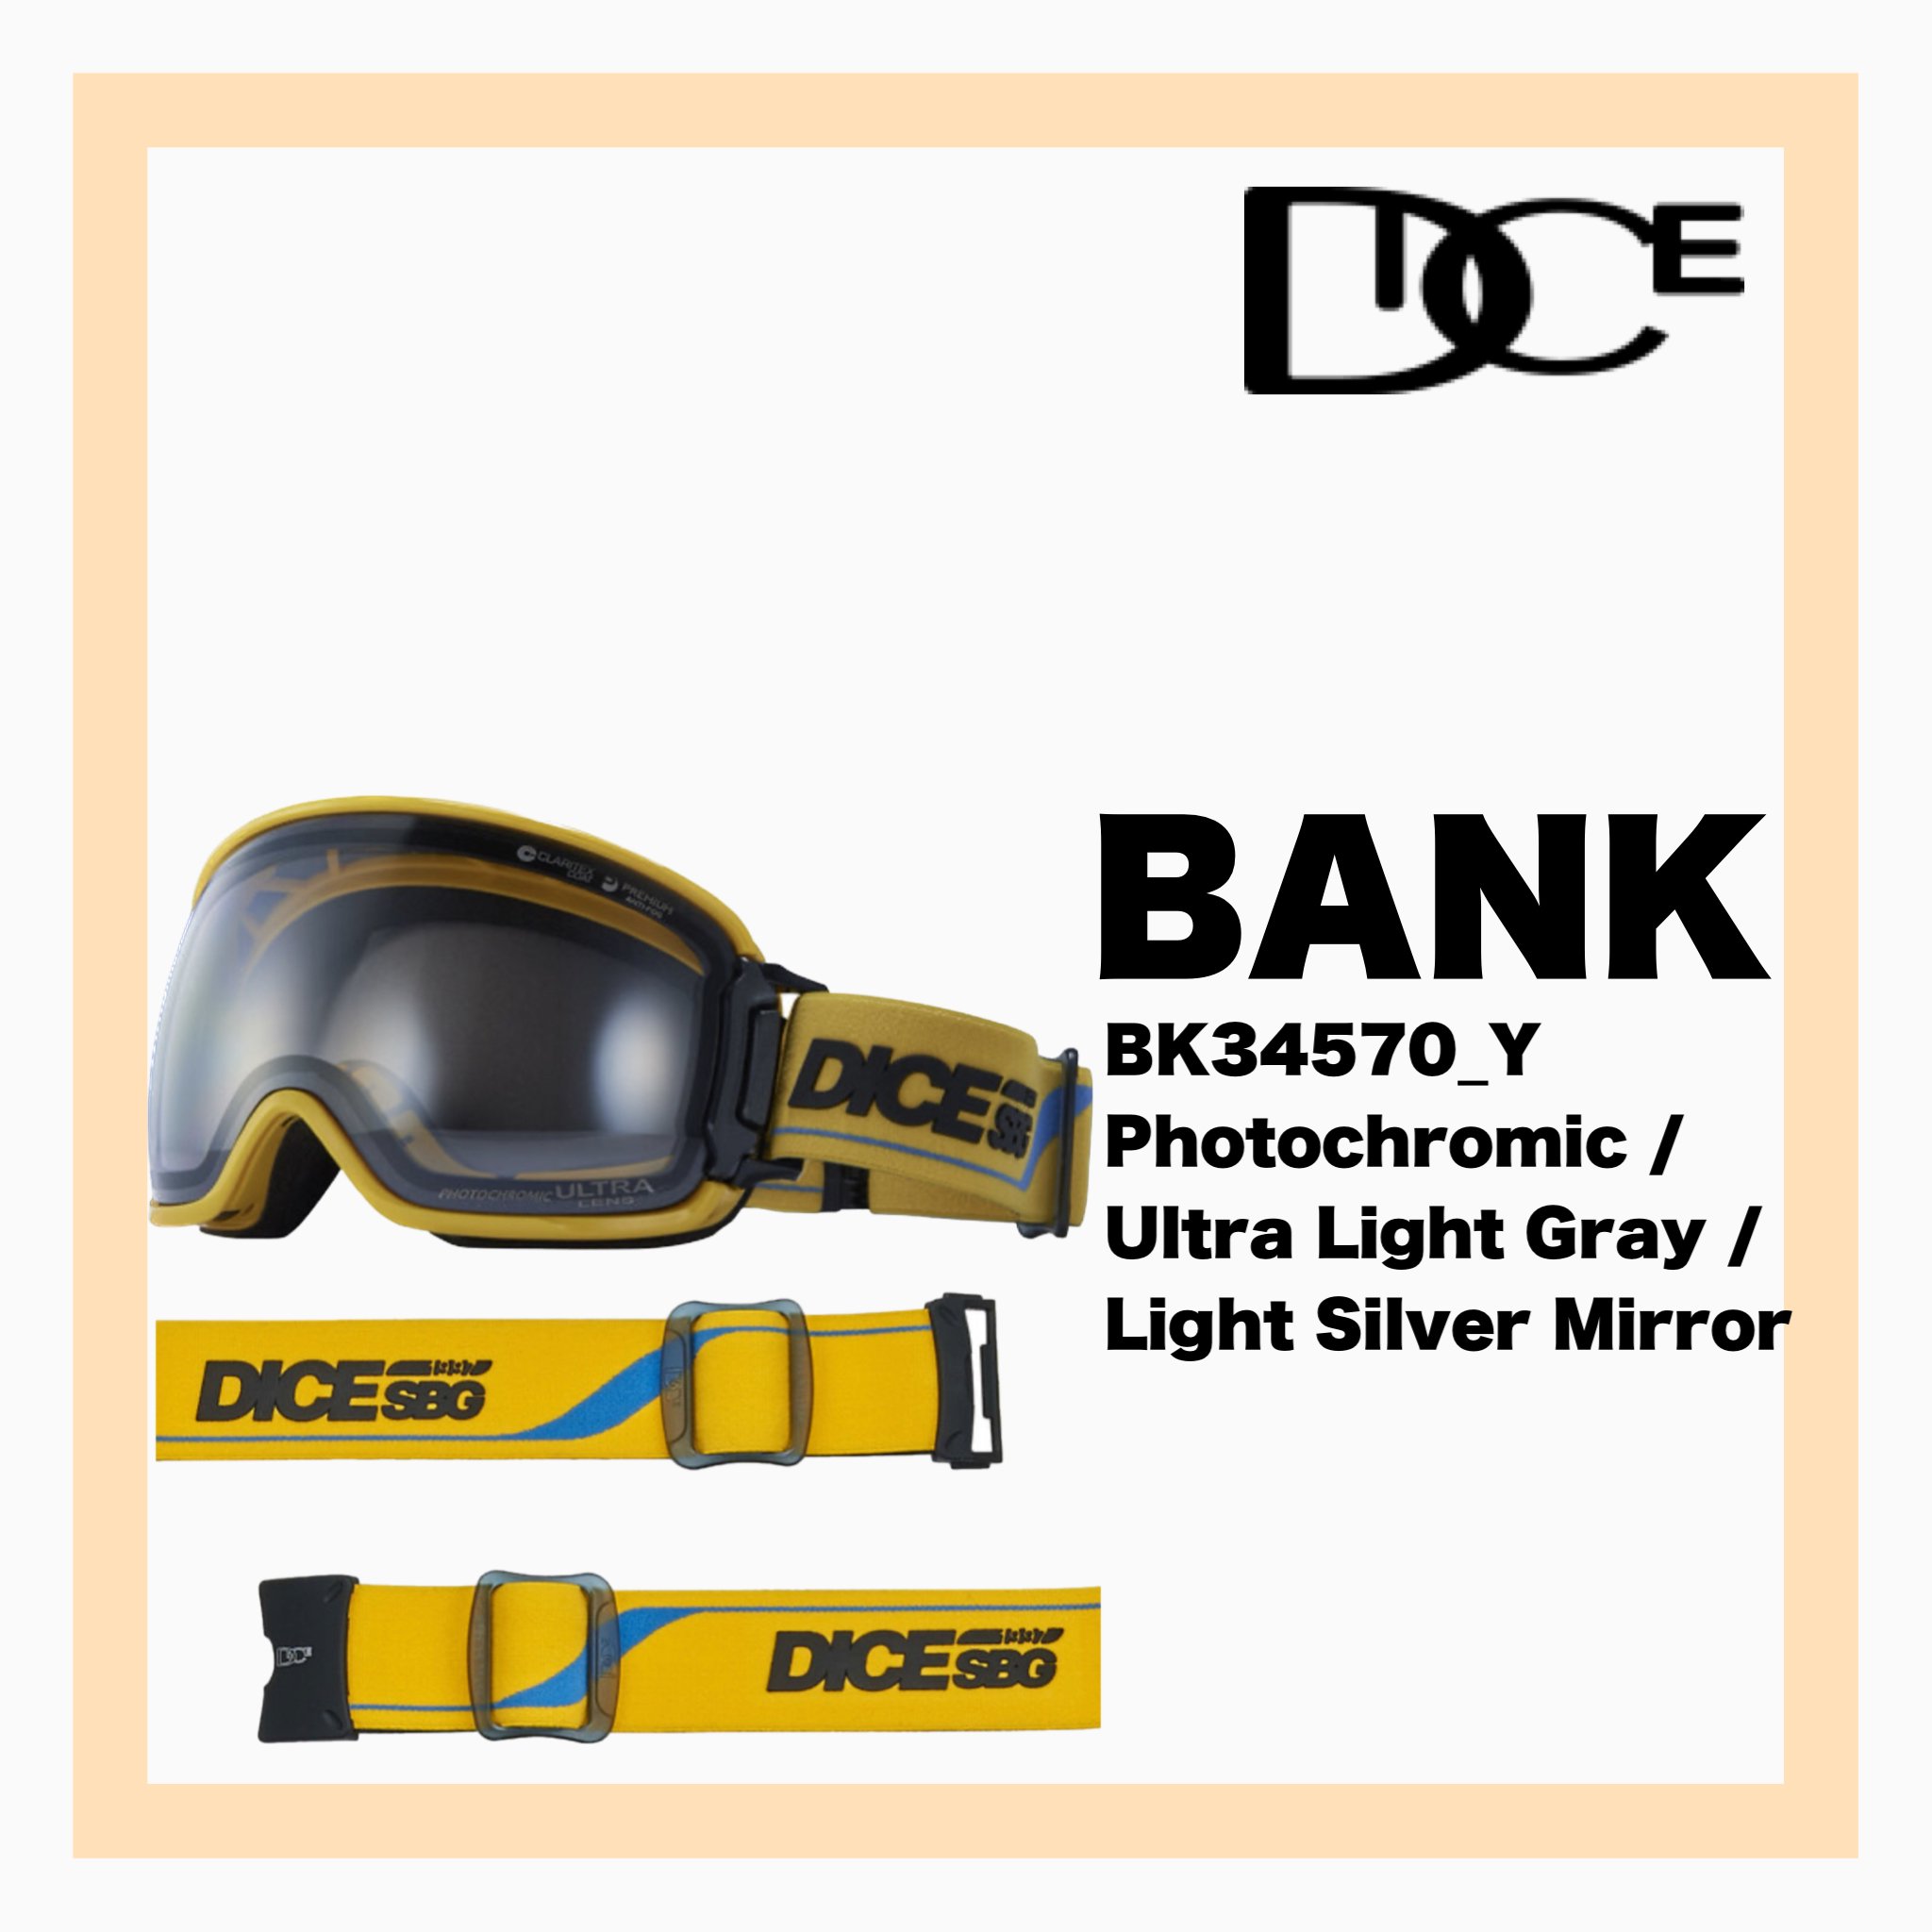 <img class='new_mark_img1' src='https://img.shop-pro.jp/img/new/icons34.gif' style='border:none;display:inline;margin:0px;padding:0px;width:auto;' />DICE BANK Y Photochromic /Ultra Light Gray / Light Silver Mirror